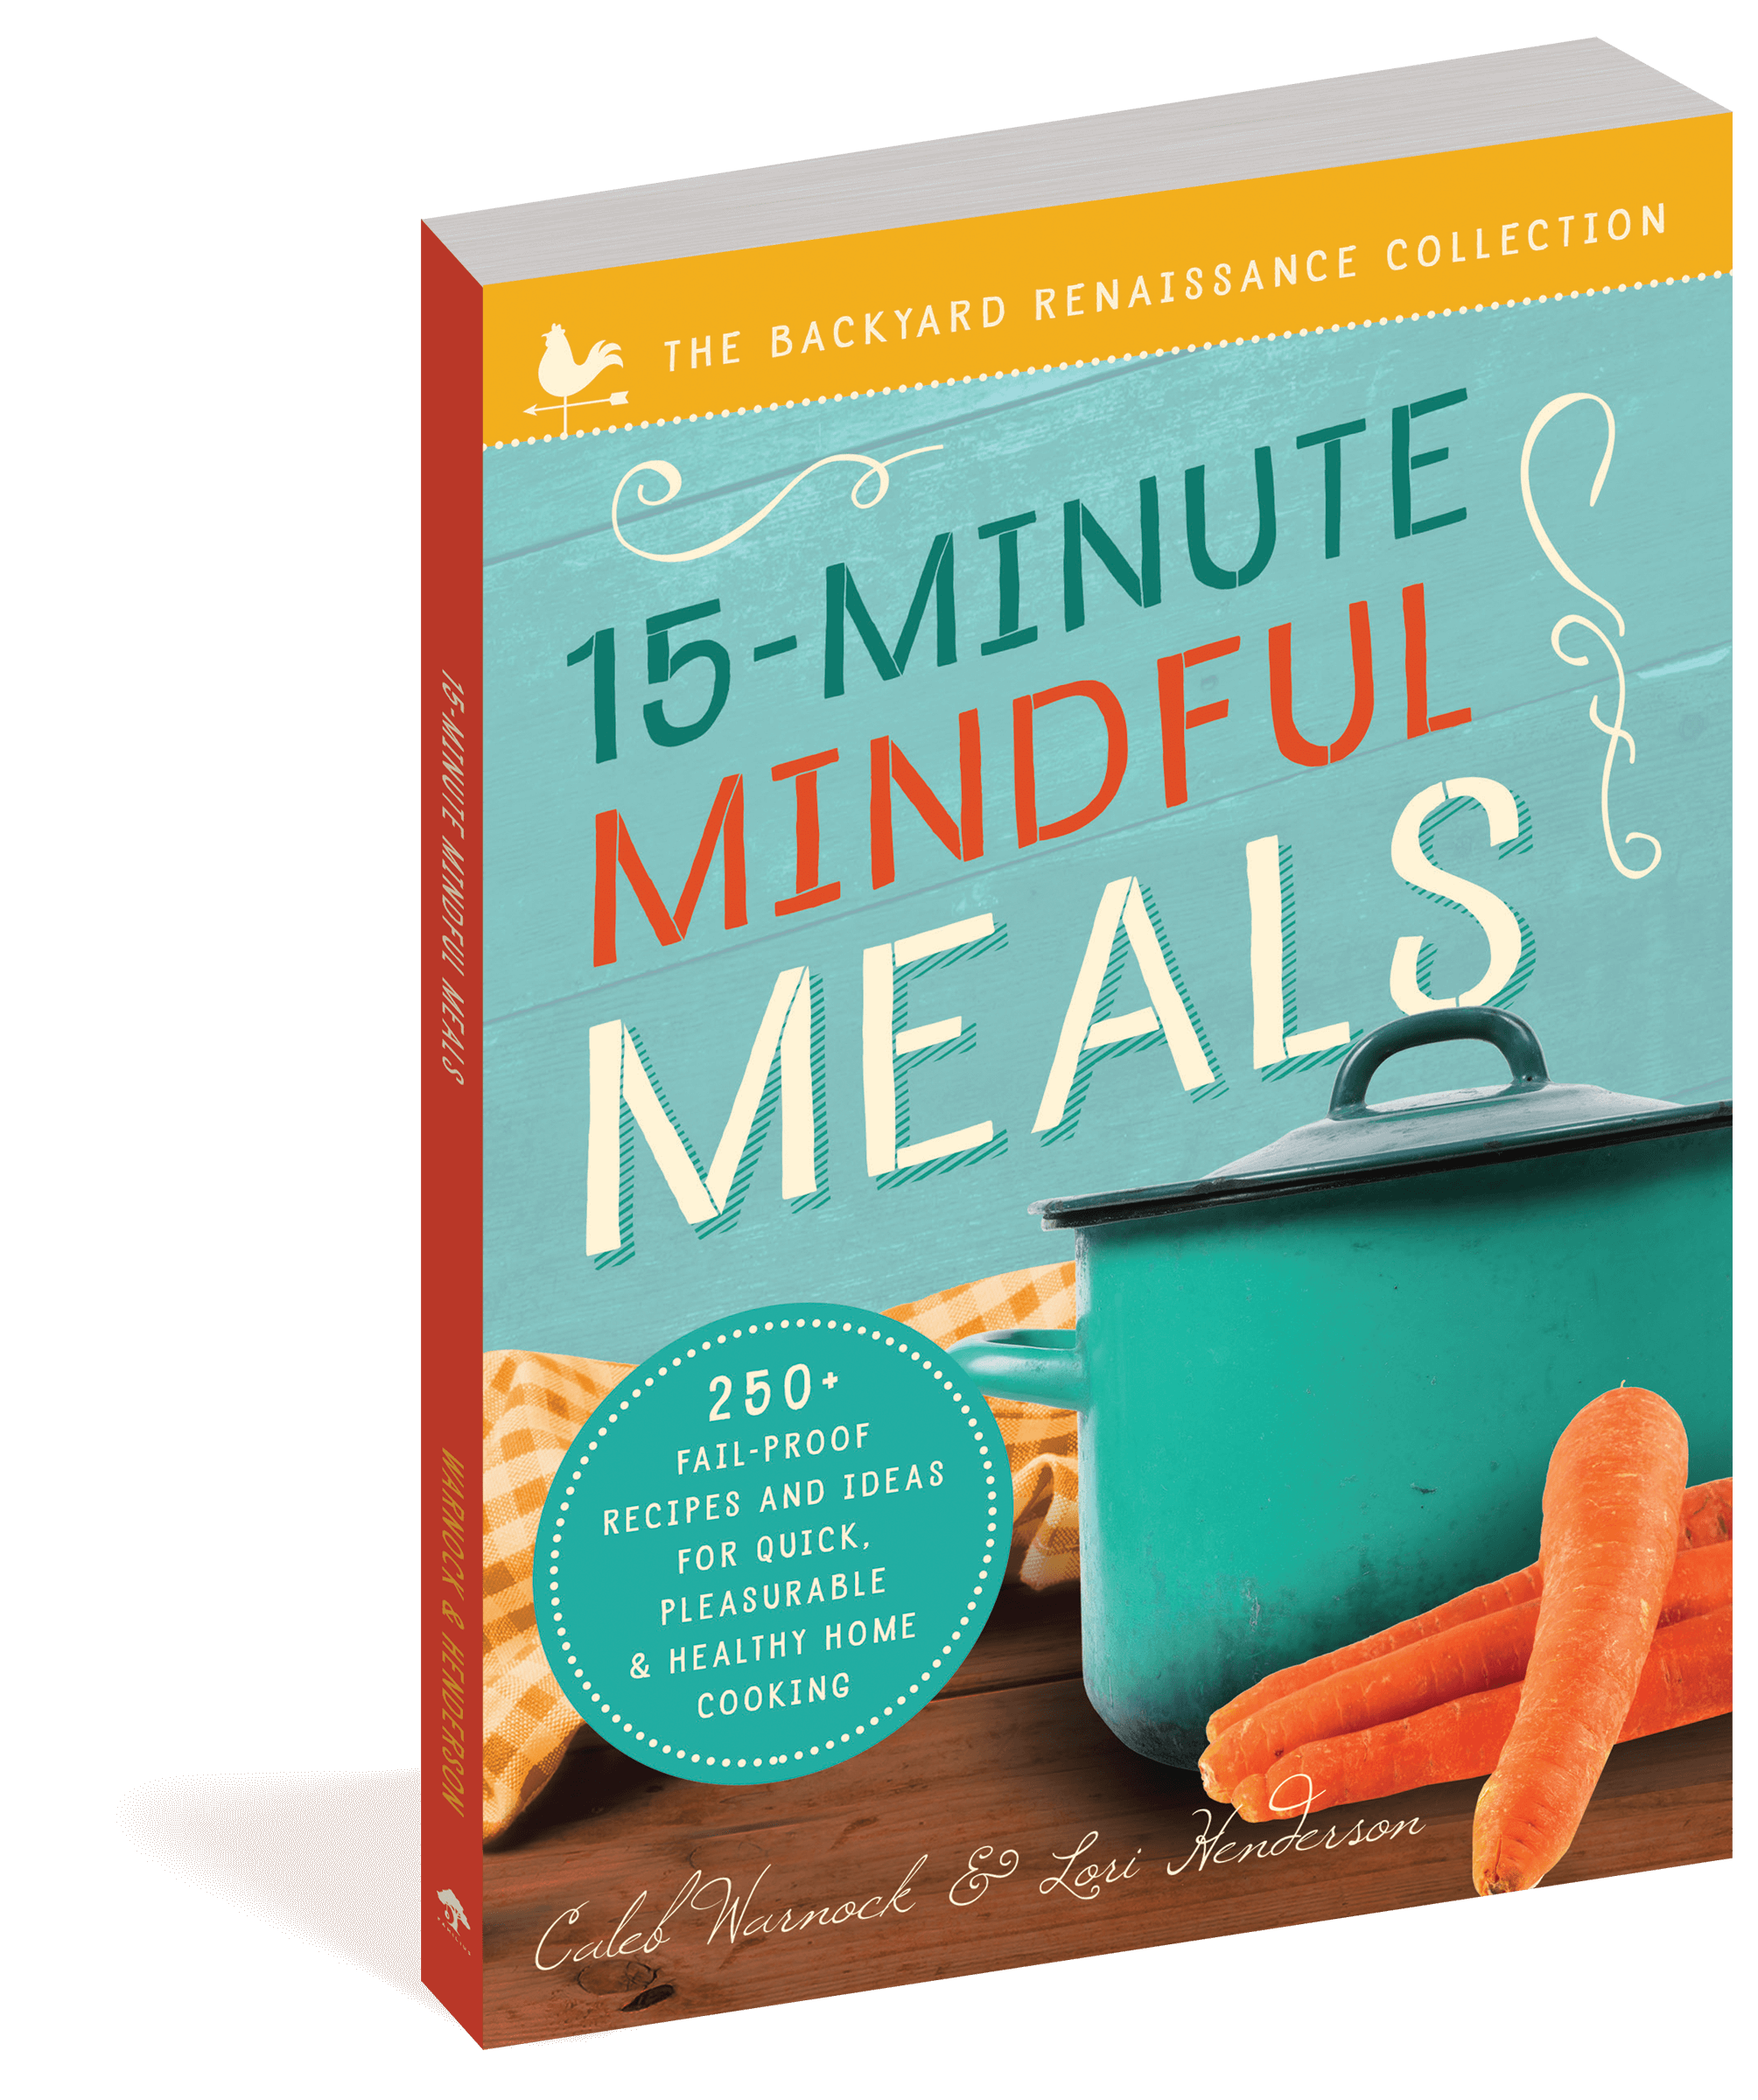 The cover of the book 15-Minute Mindful Meals.